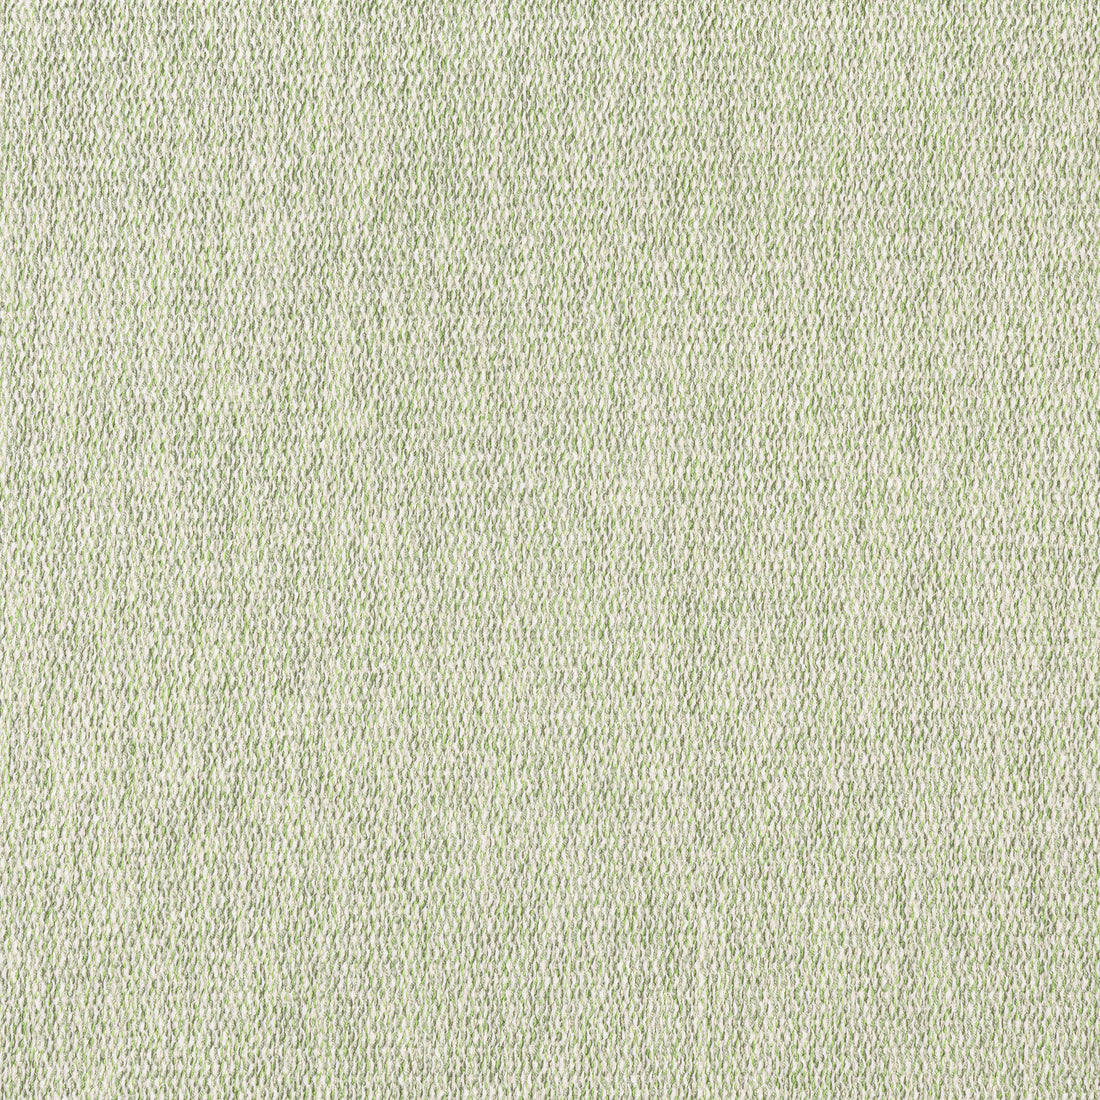 Arroyo fabric in aloe color - pattern number W8784 - by Thibaut in the Haven Textures collection